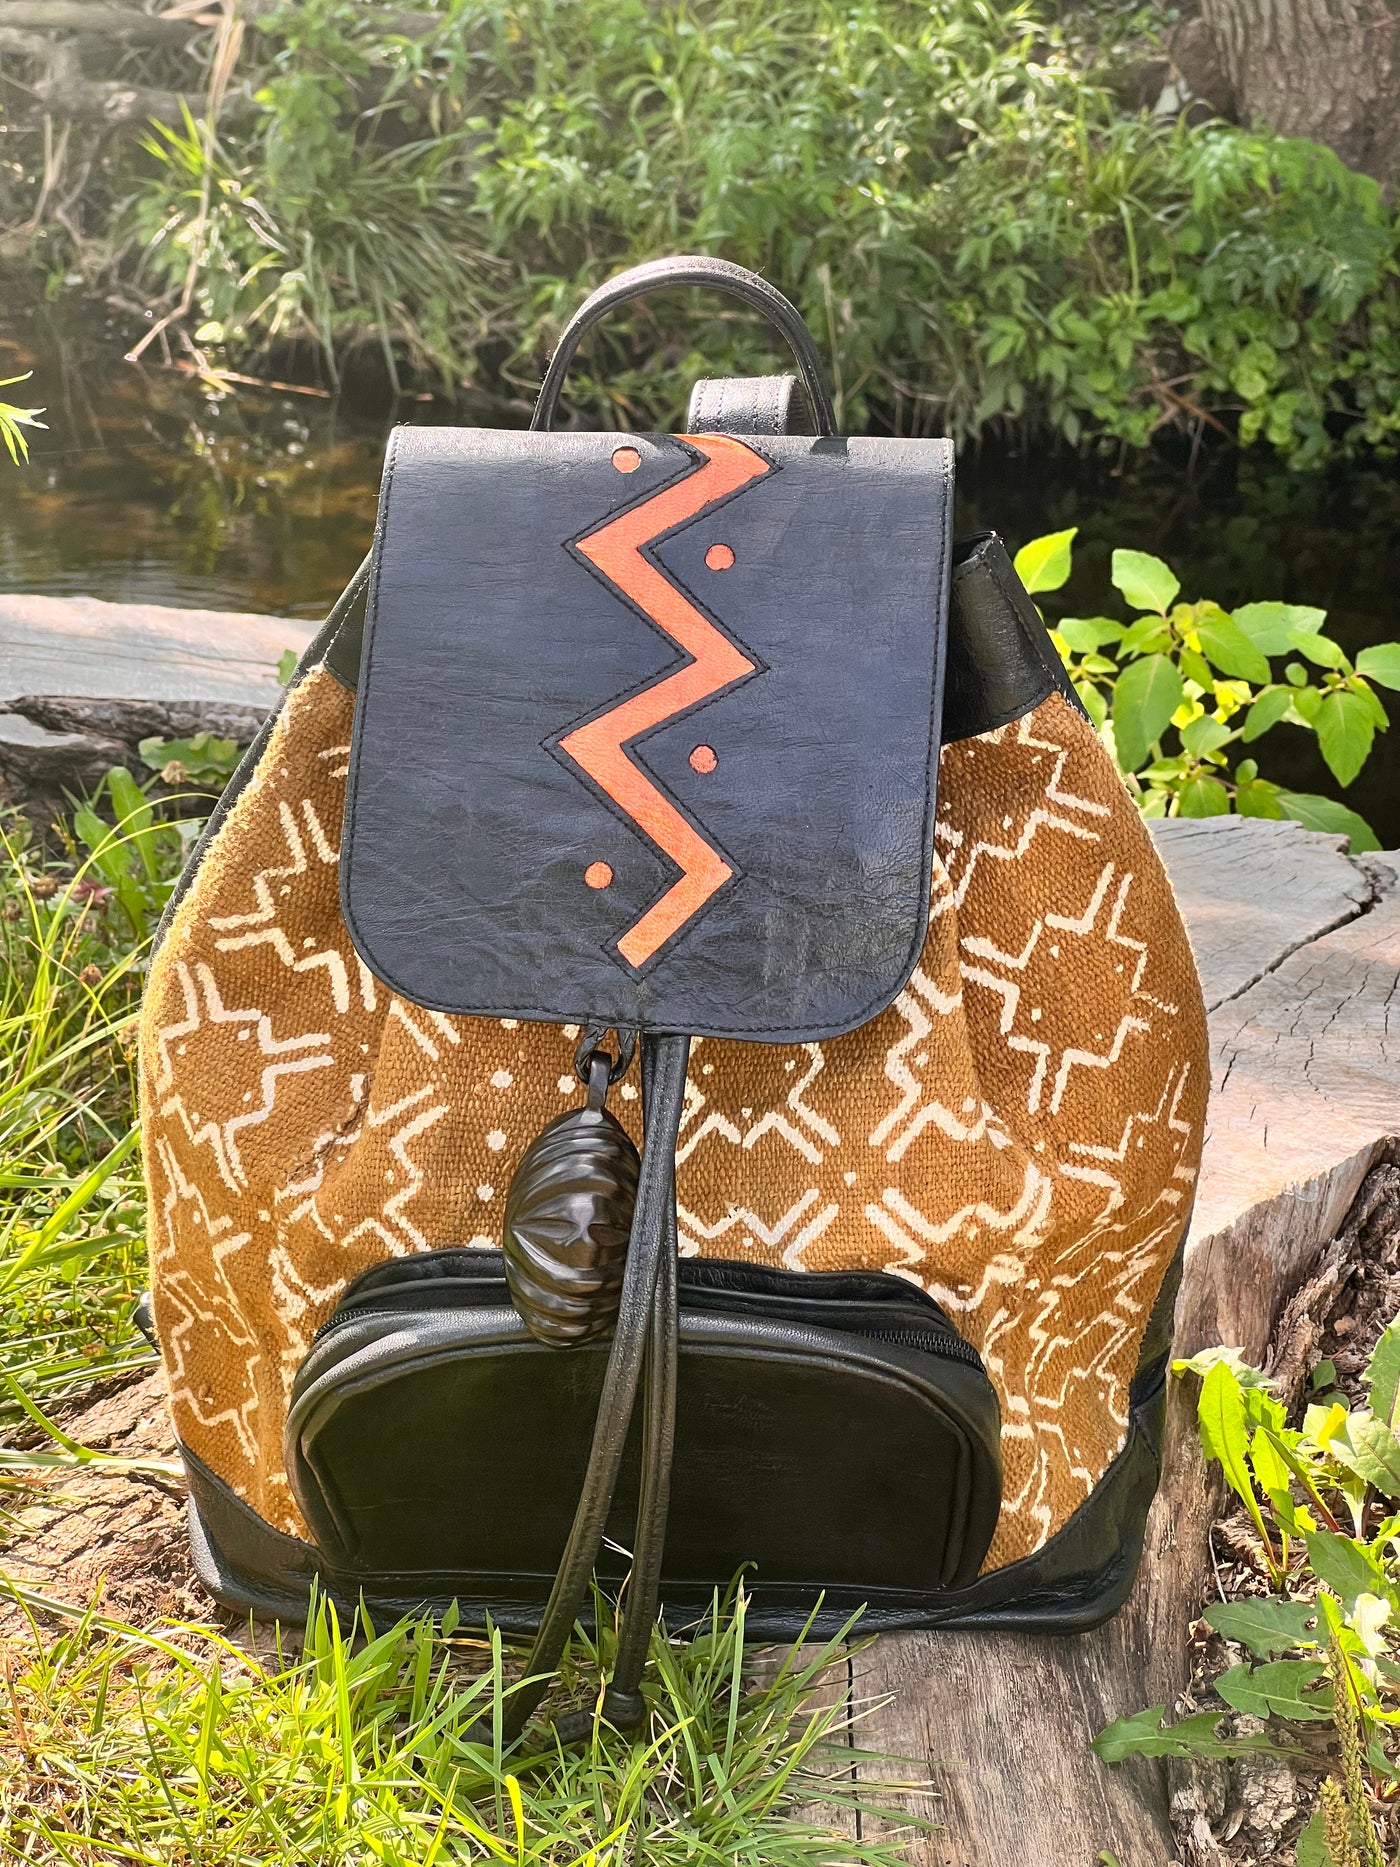 "Artisanal Midsize Leather Backpack with Malian Bogolanfini Fabric Accent"